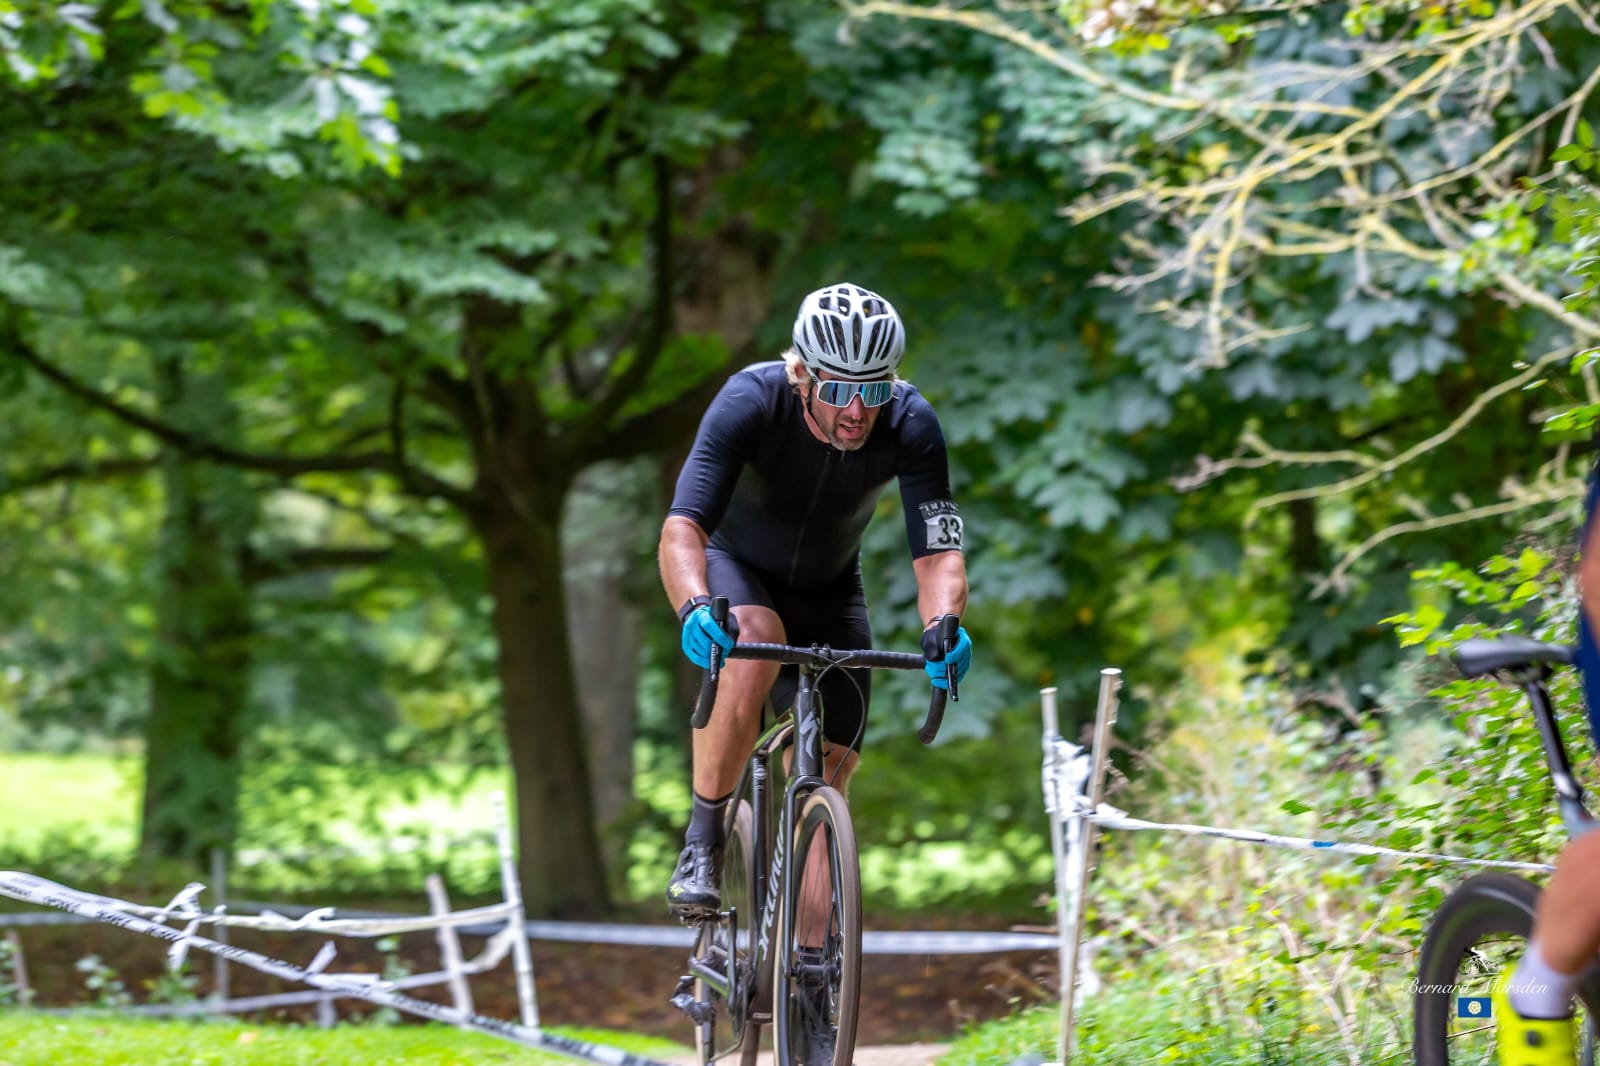 Photo shows Marcus Sutcliffe cycling cross country on a road, with trees behind.